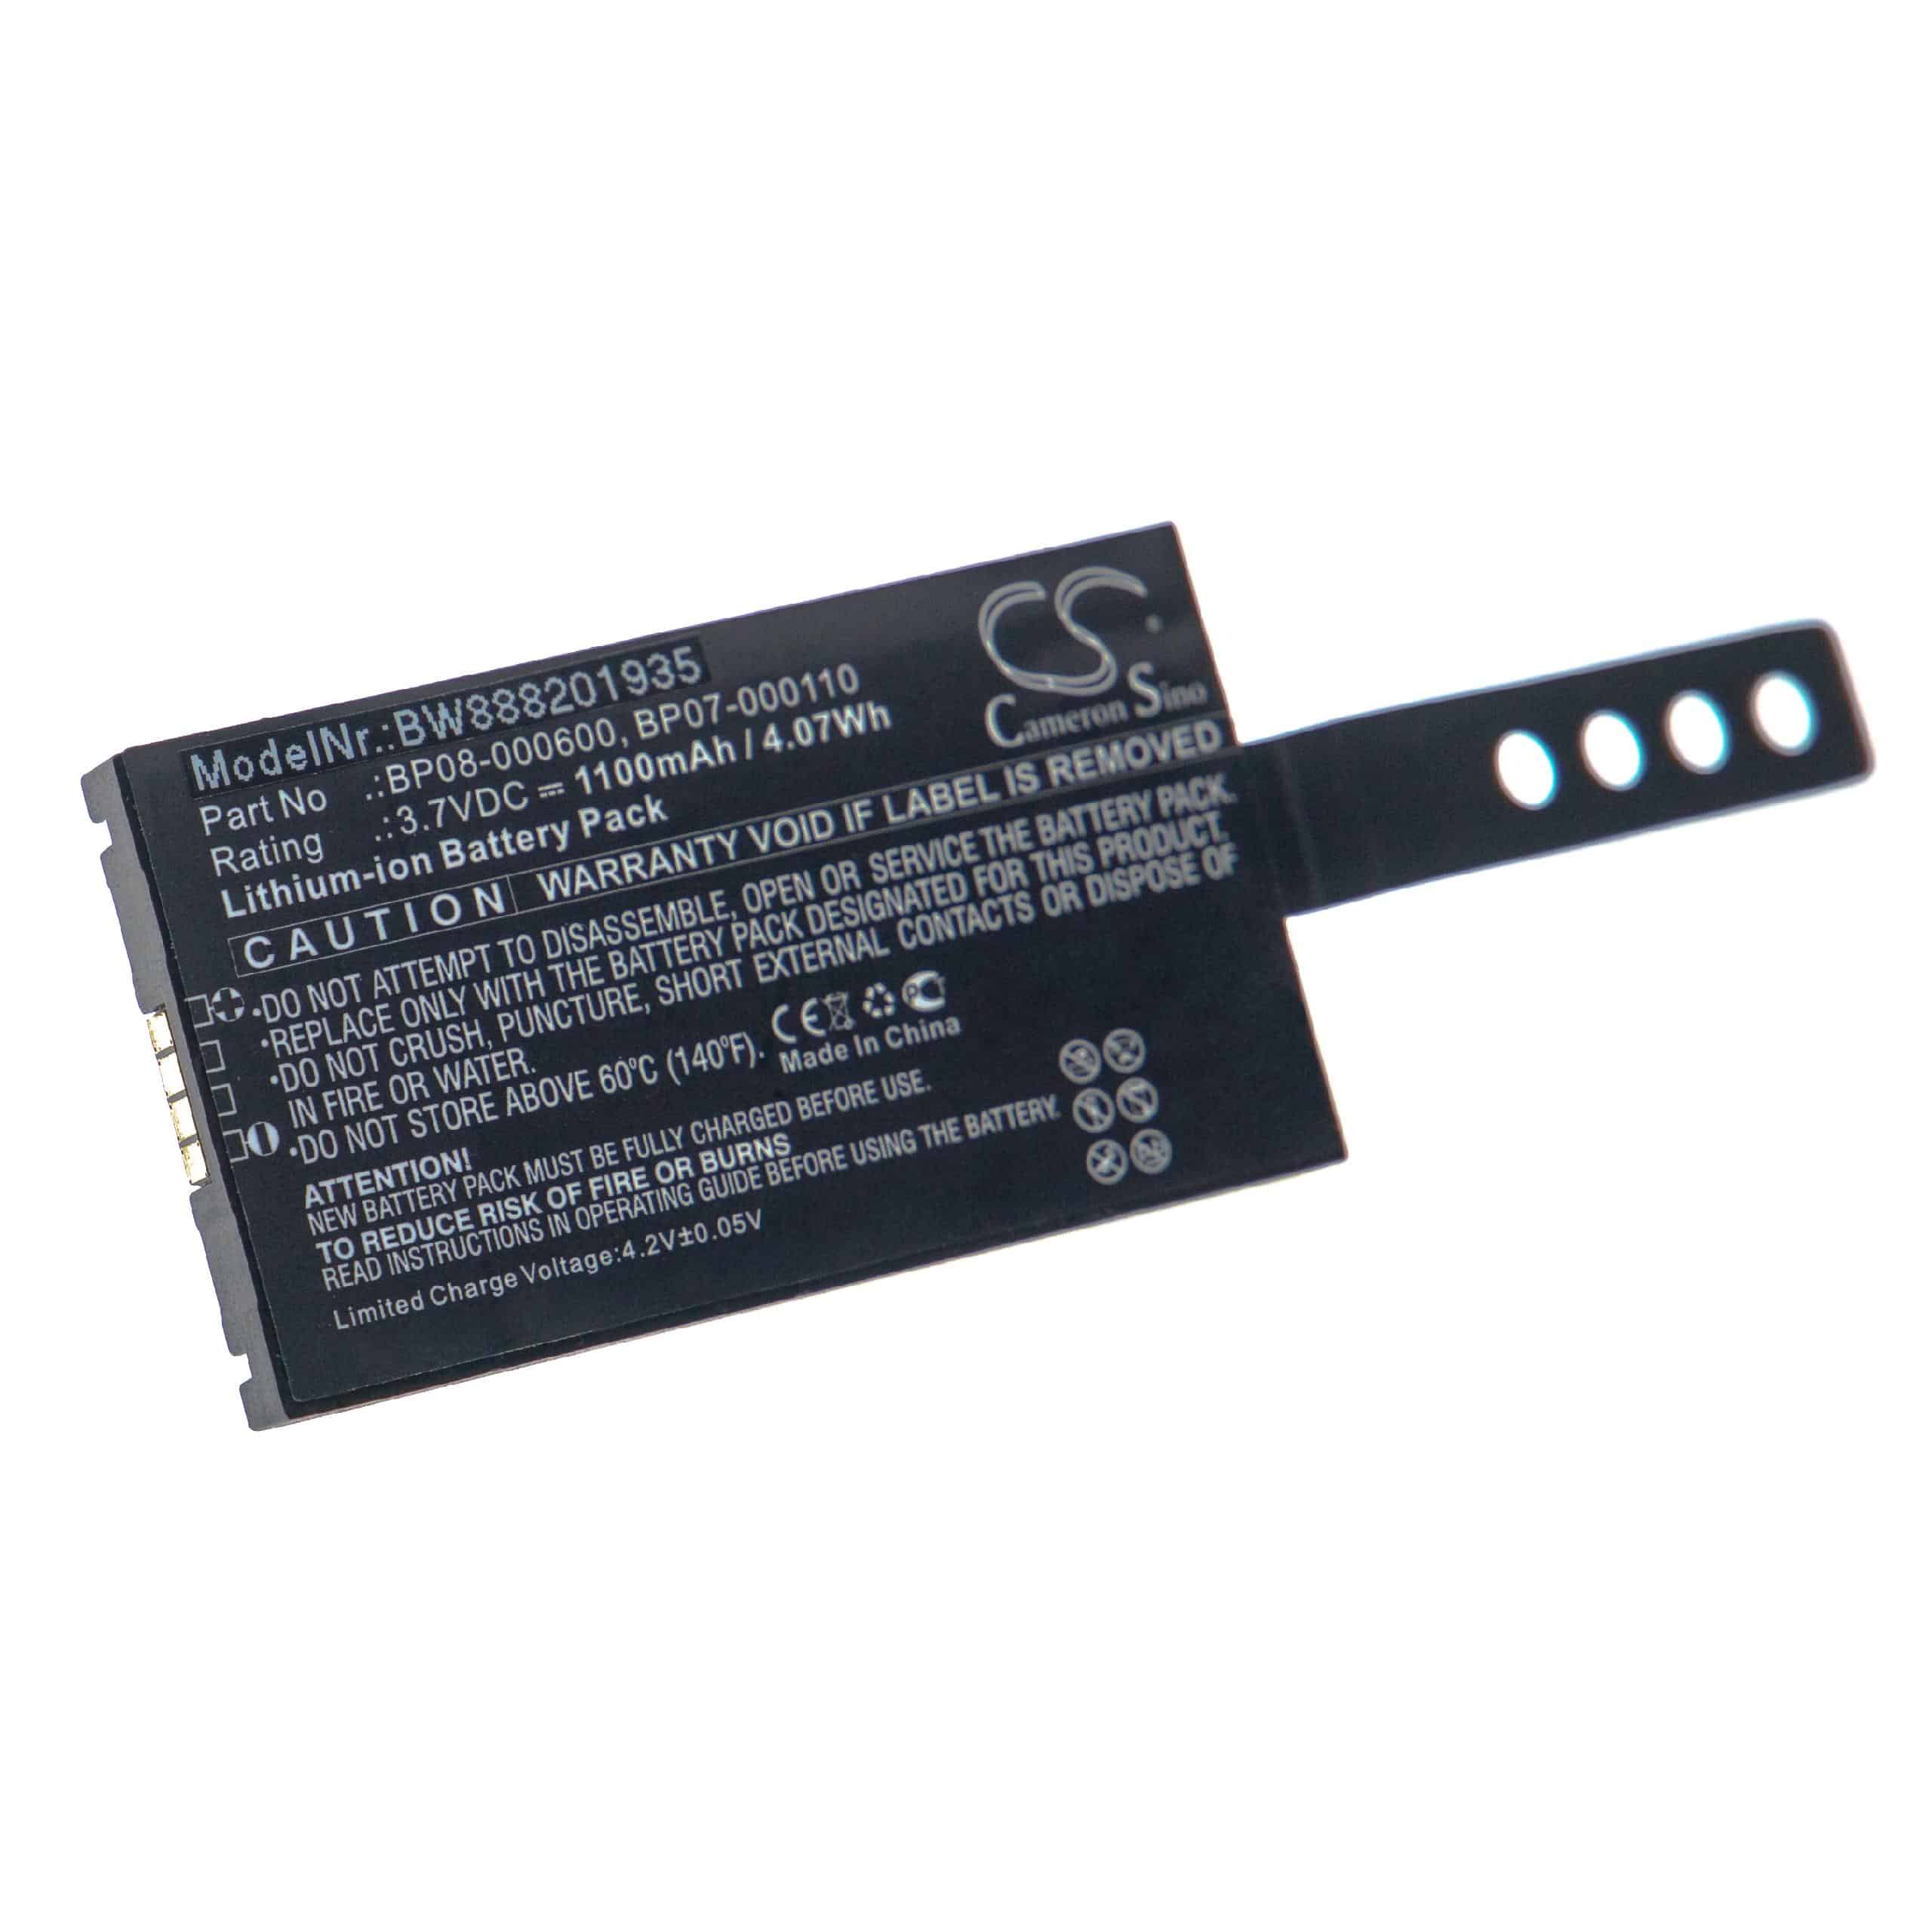 Barcode Scanner POS Battery Replacement for Datalogic 11300794, 3H21-00000370, 800065-56 - 1100mAh 3.7V Li-Ion